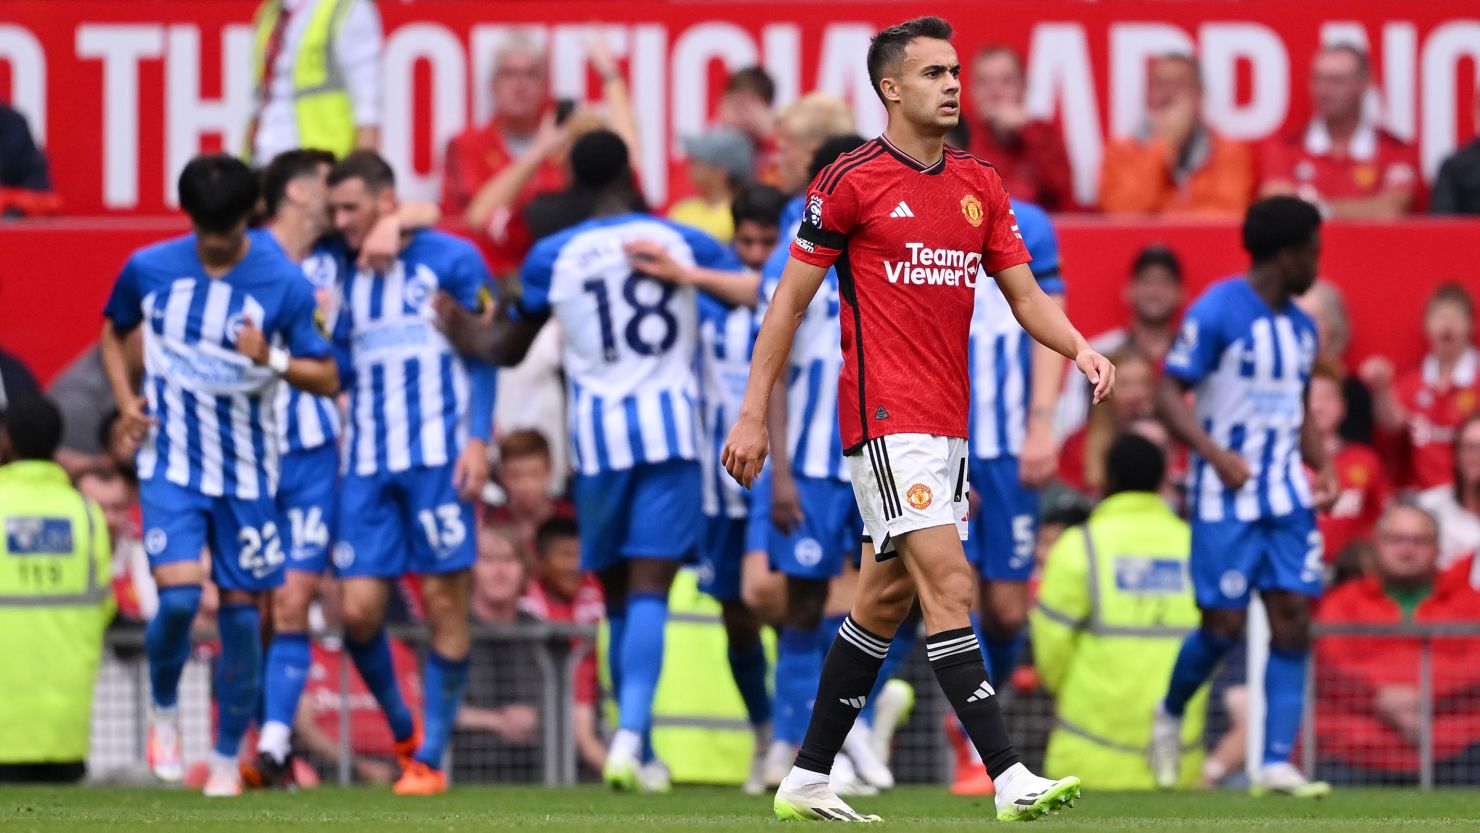 Manchester United suffered a third defeat in five Premier League matches to start the season.